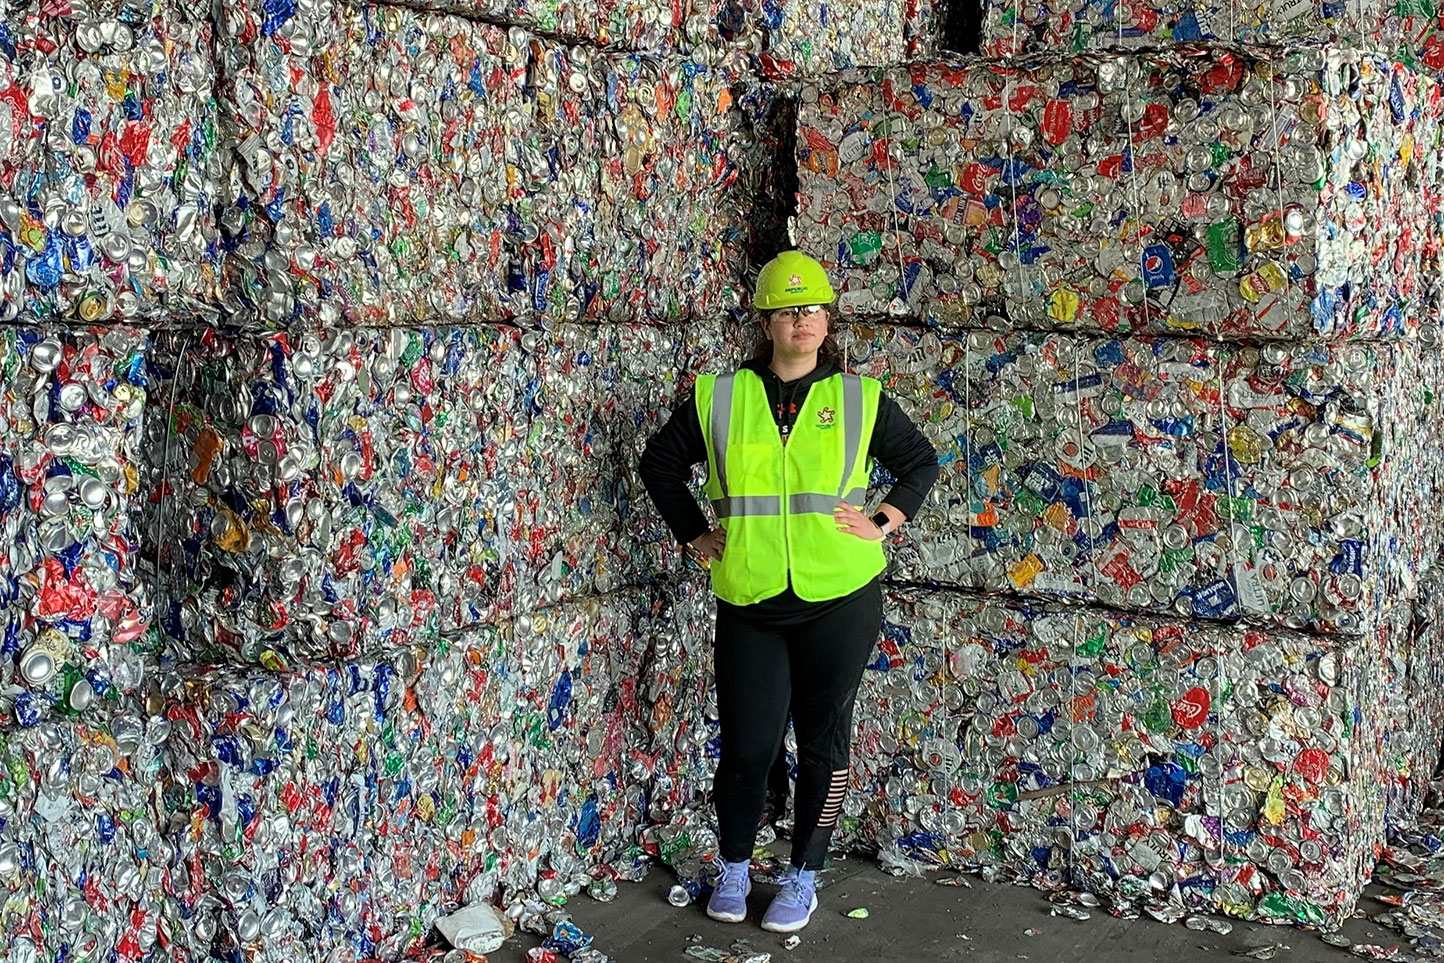 University of Louisiana at Lafayette chemical engineering major Lauren Prudhomme in front of stacks of recycled aluminum cans